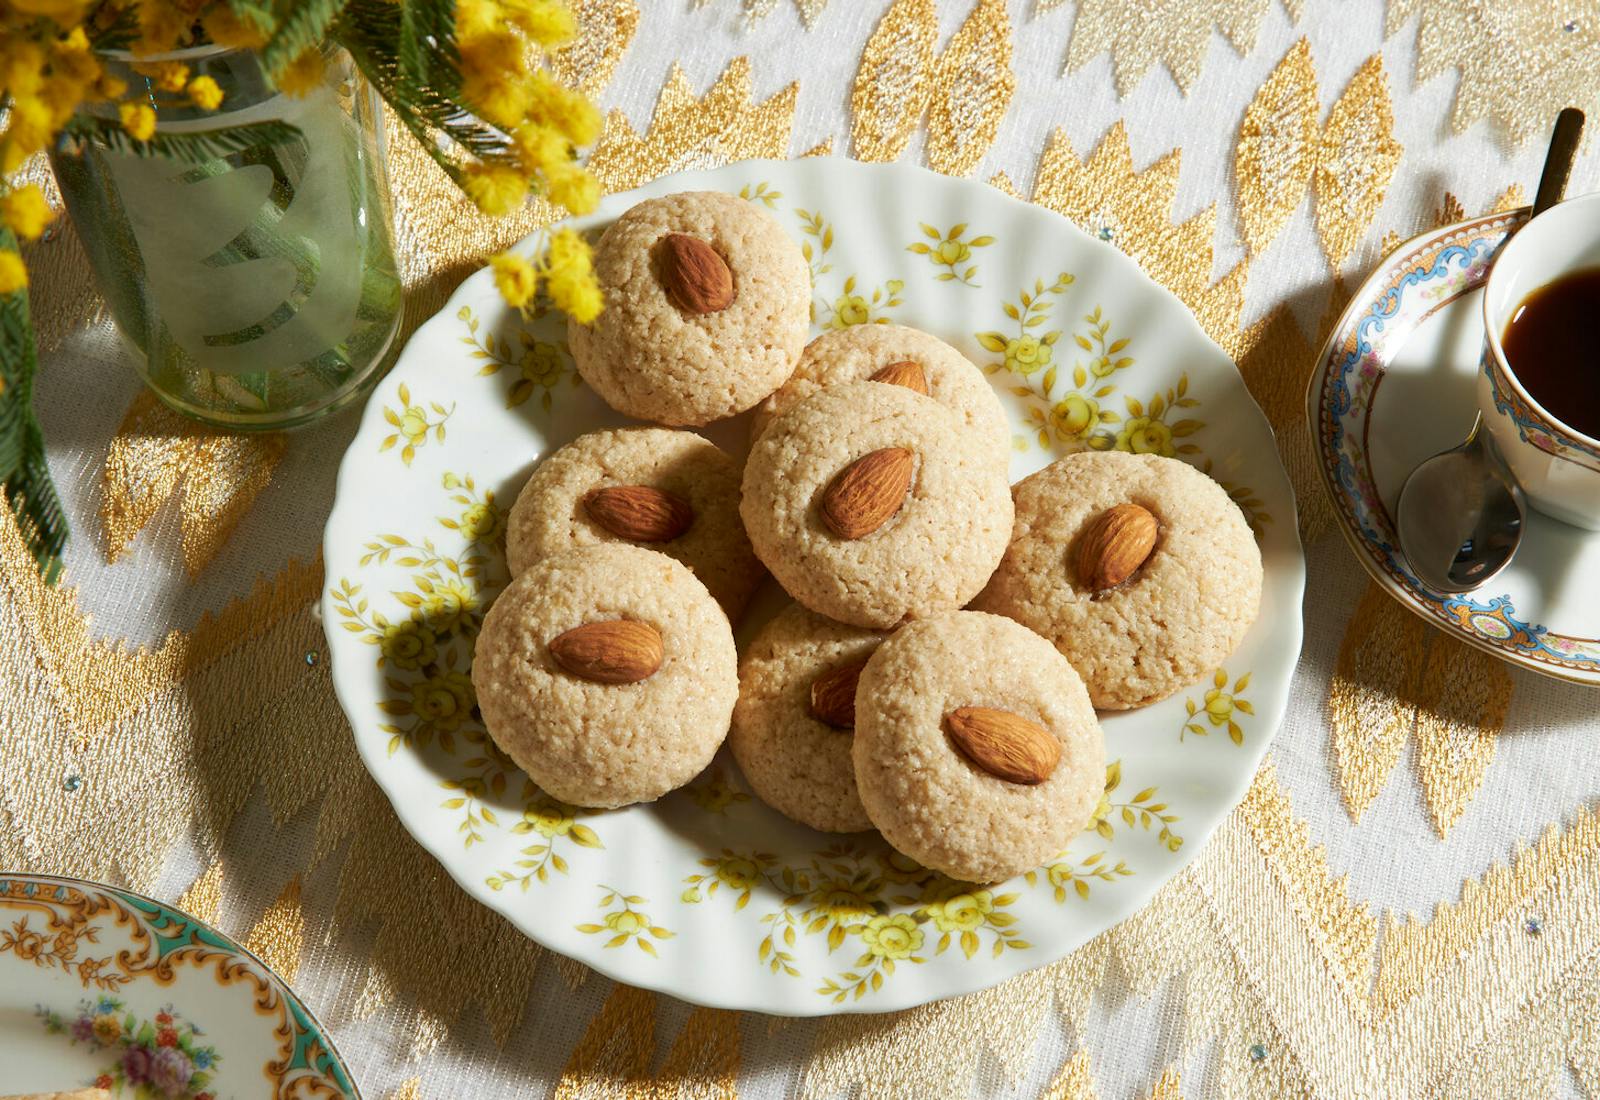 Cookies on yellow floral plate with tea and fresh flowers, atop gold tablecloth.